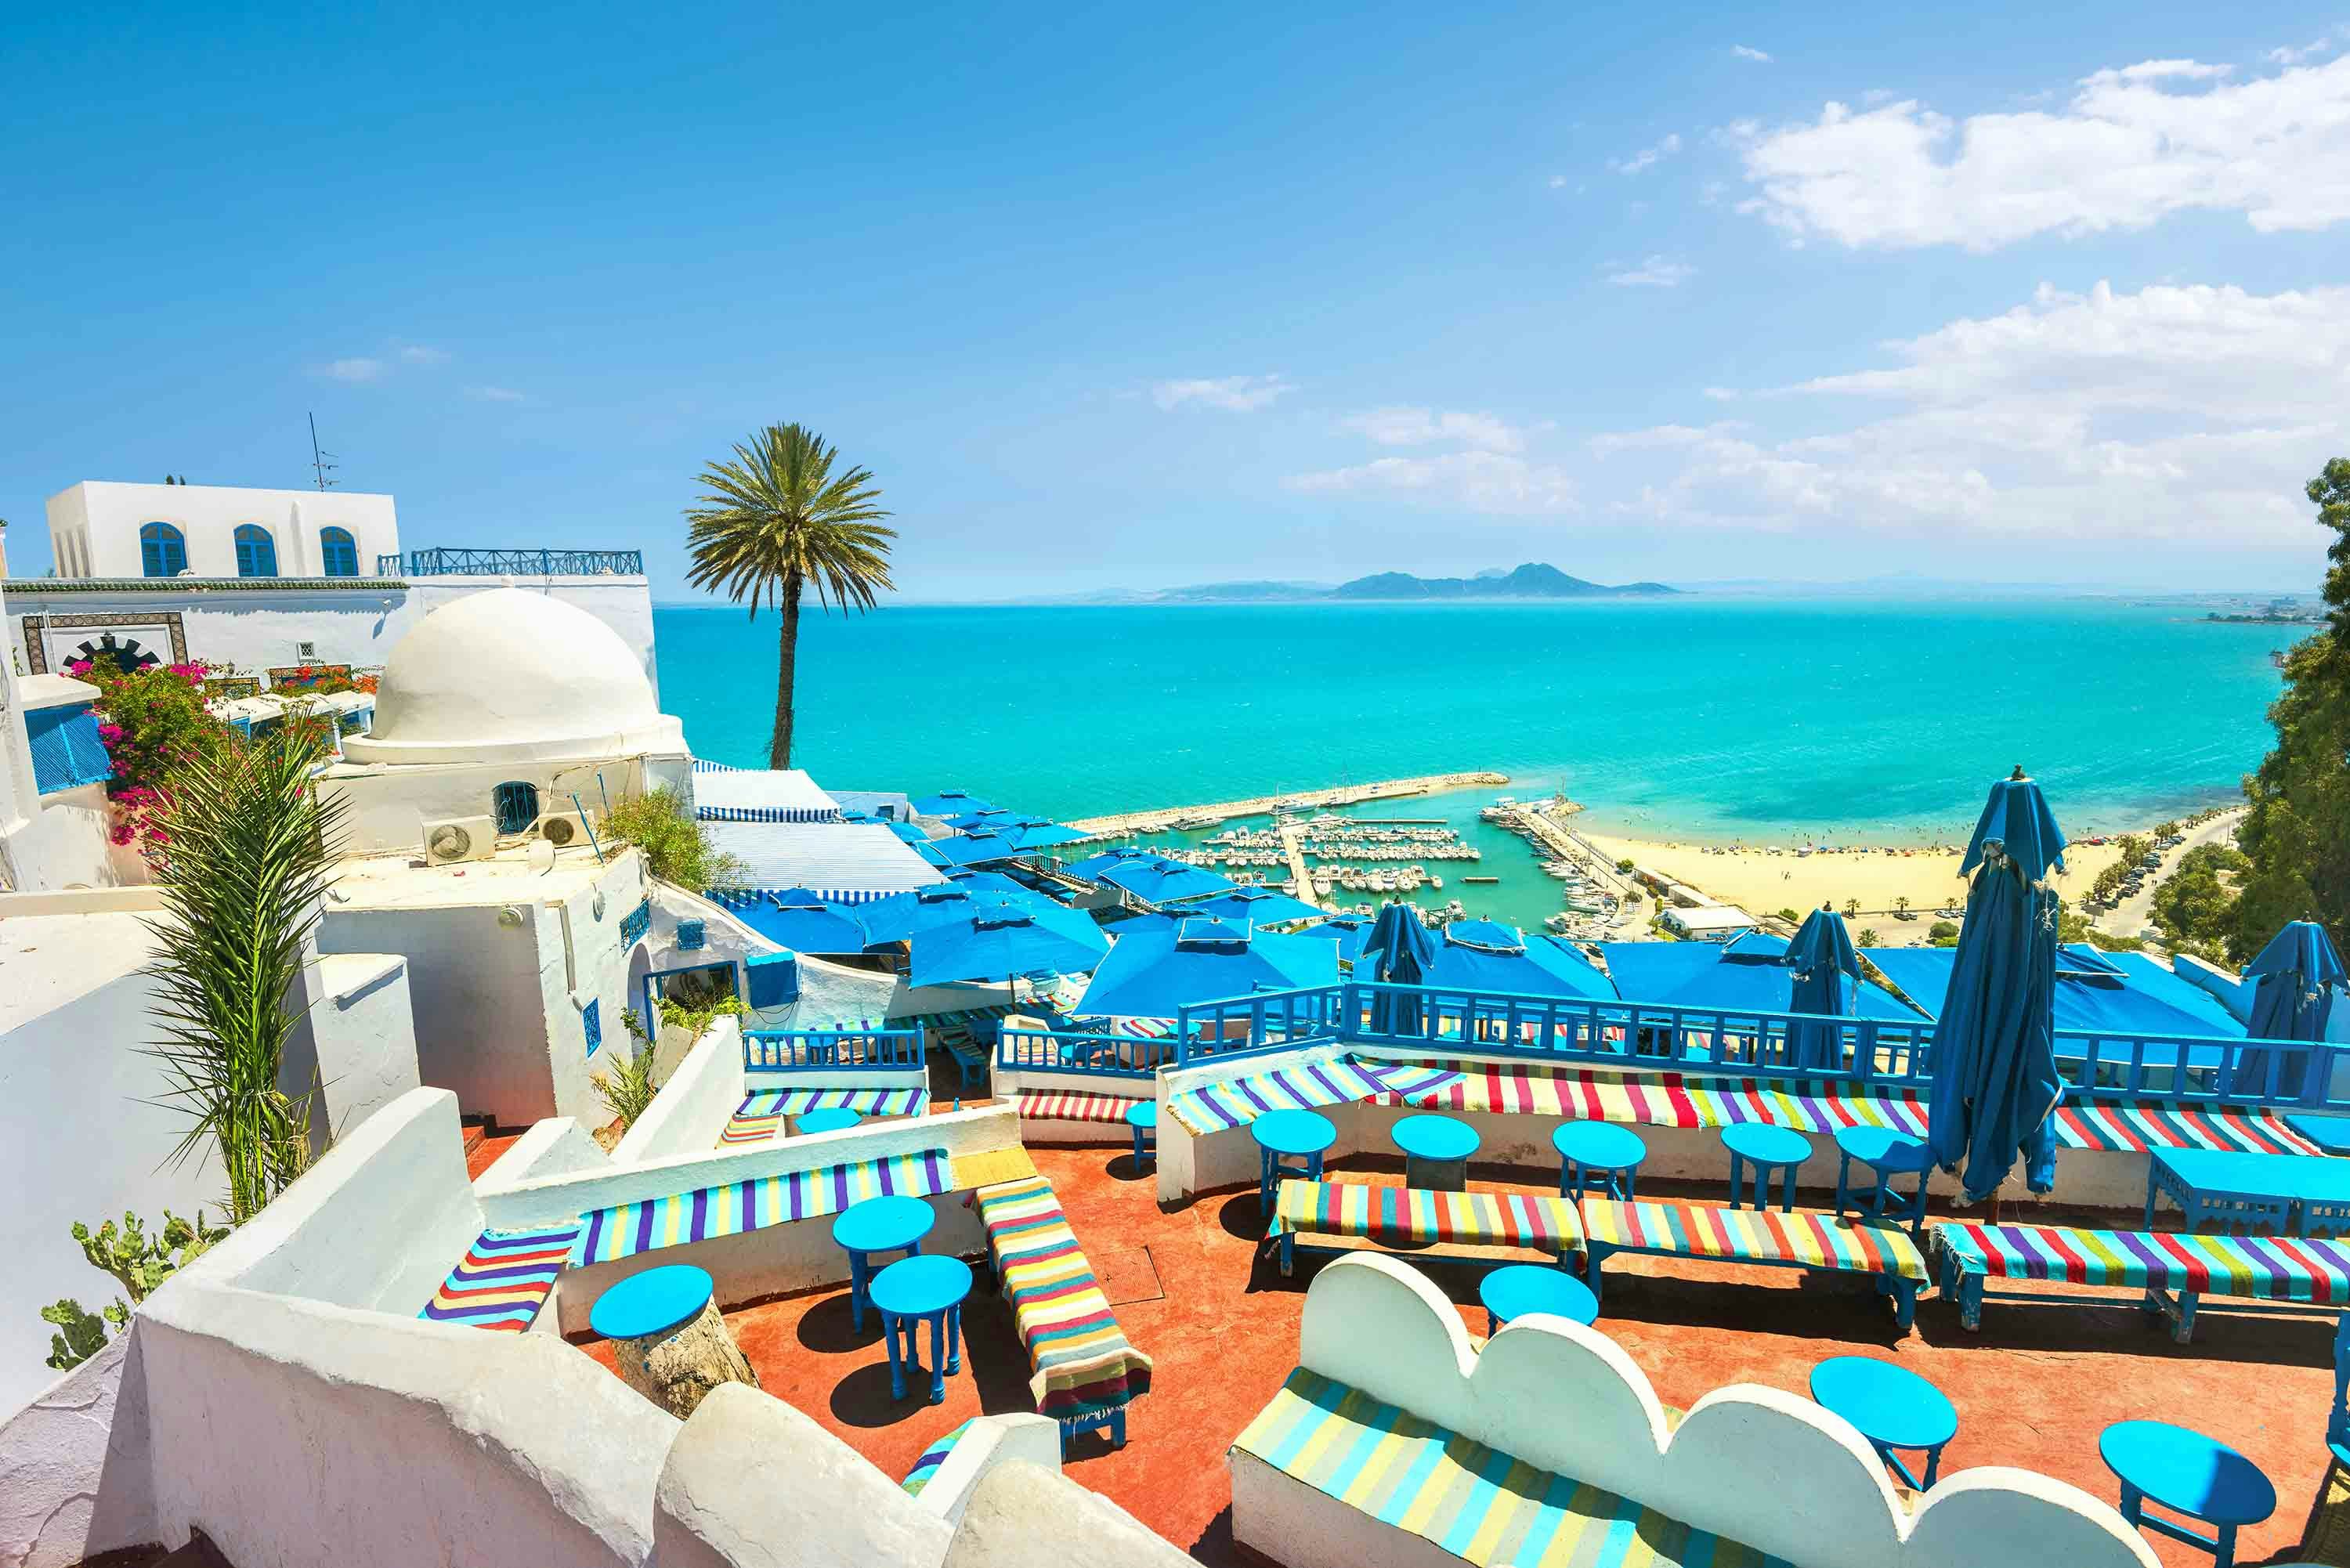 Sidi Bou Said is the the southern Med's answer to Santorini